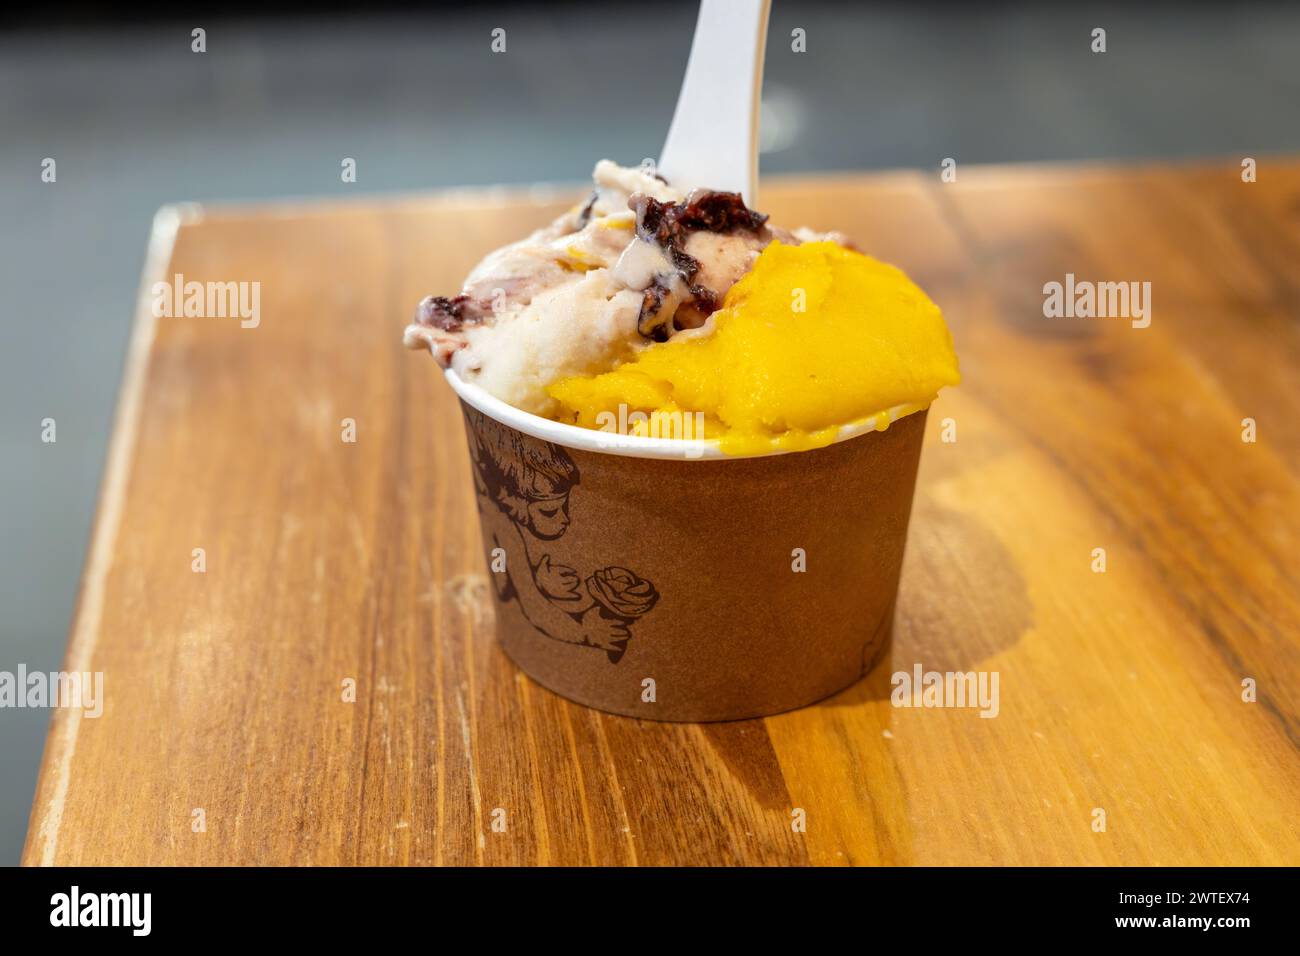 Mango and cherry ice-cream in the disposable cup on the table. Italian gelateria. Natural fresh gelato. Stock Photo